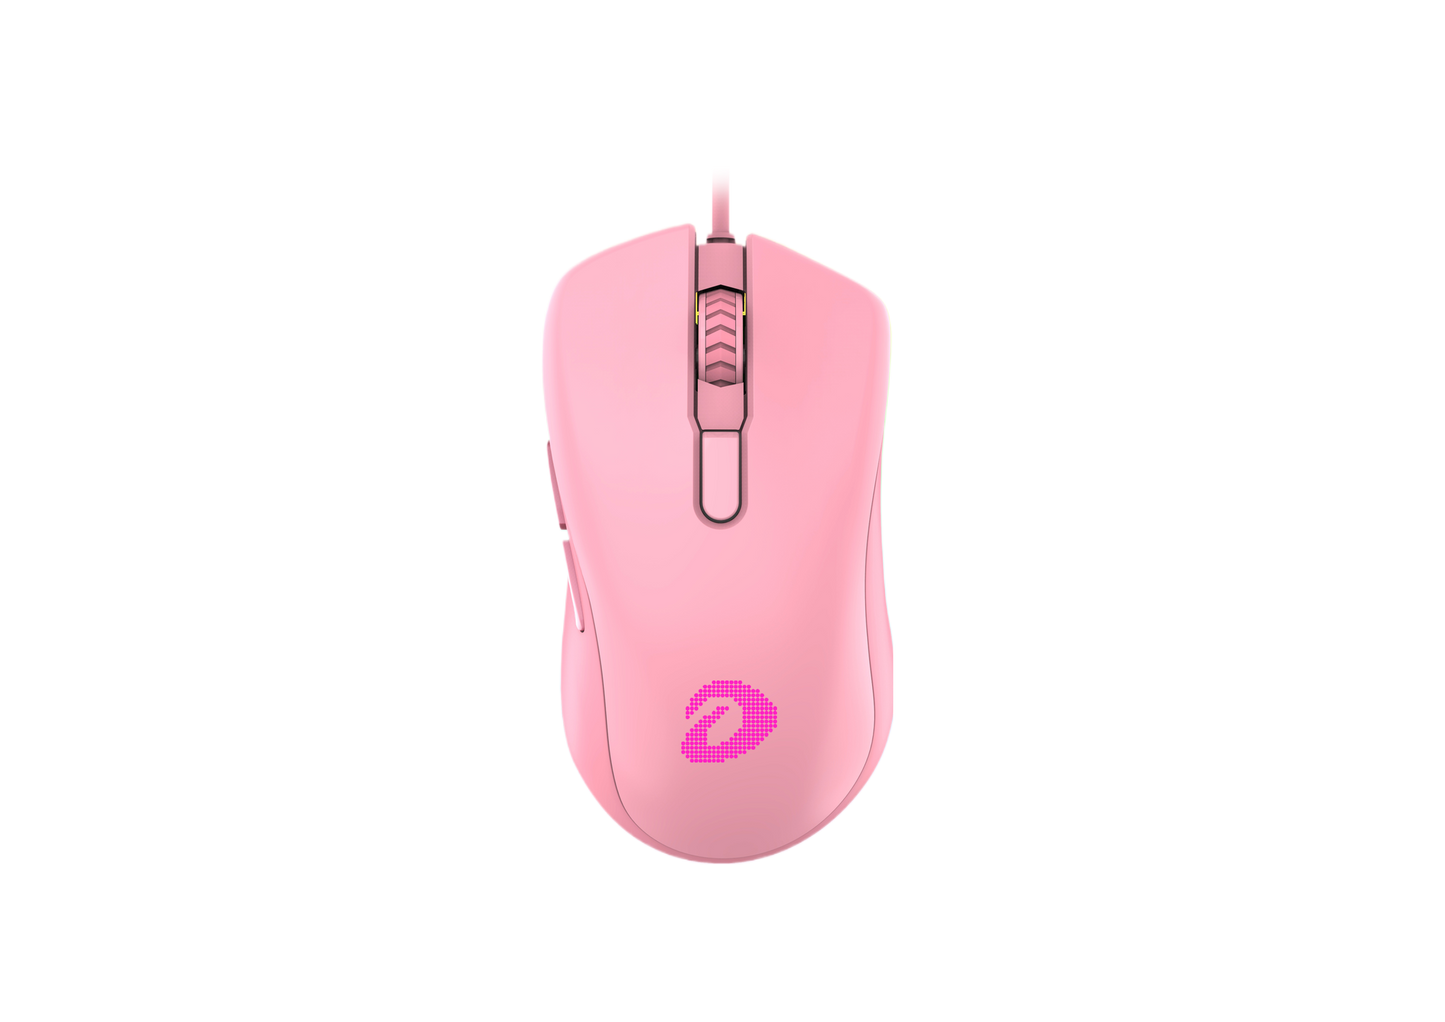 Dareu Gaming Office Mouse 6 Programmable Buttons, Ergonomic RGB Mouse with 16.8 Million Chroma 7 Backlit for PC, Laptop, and Notebook